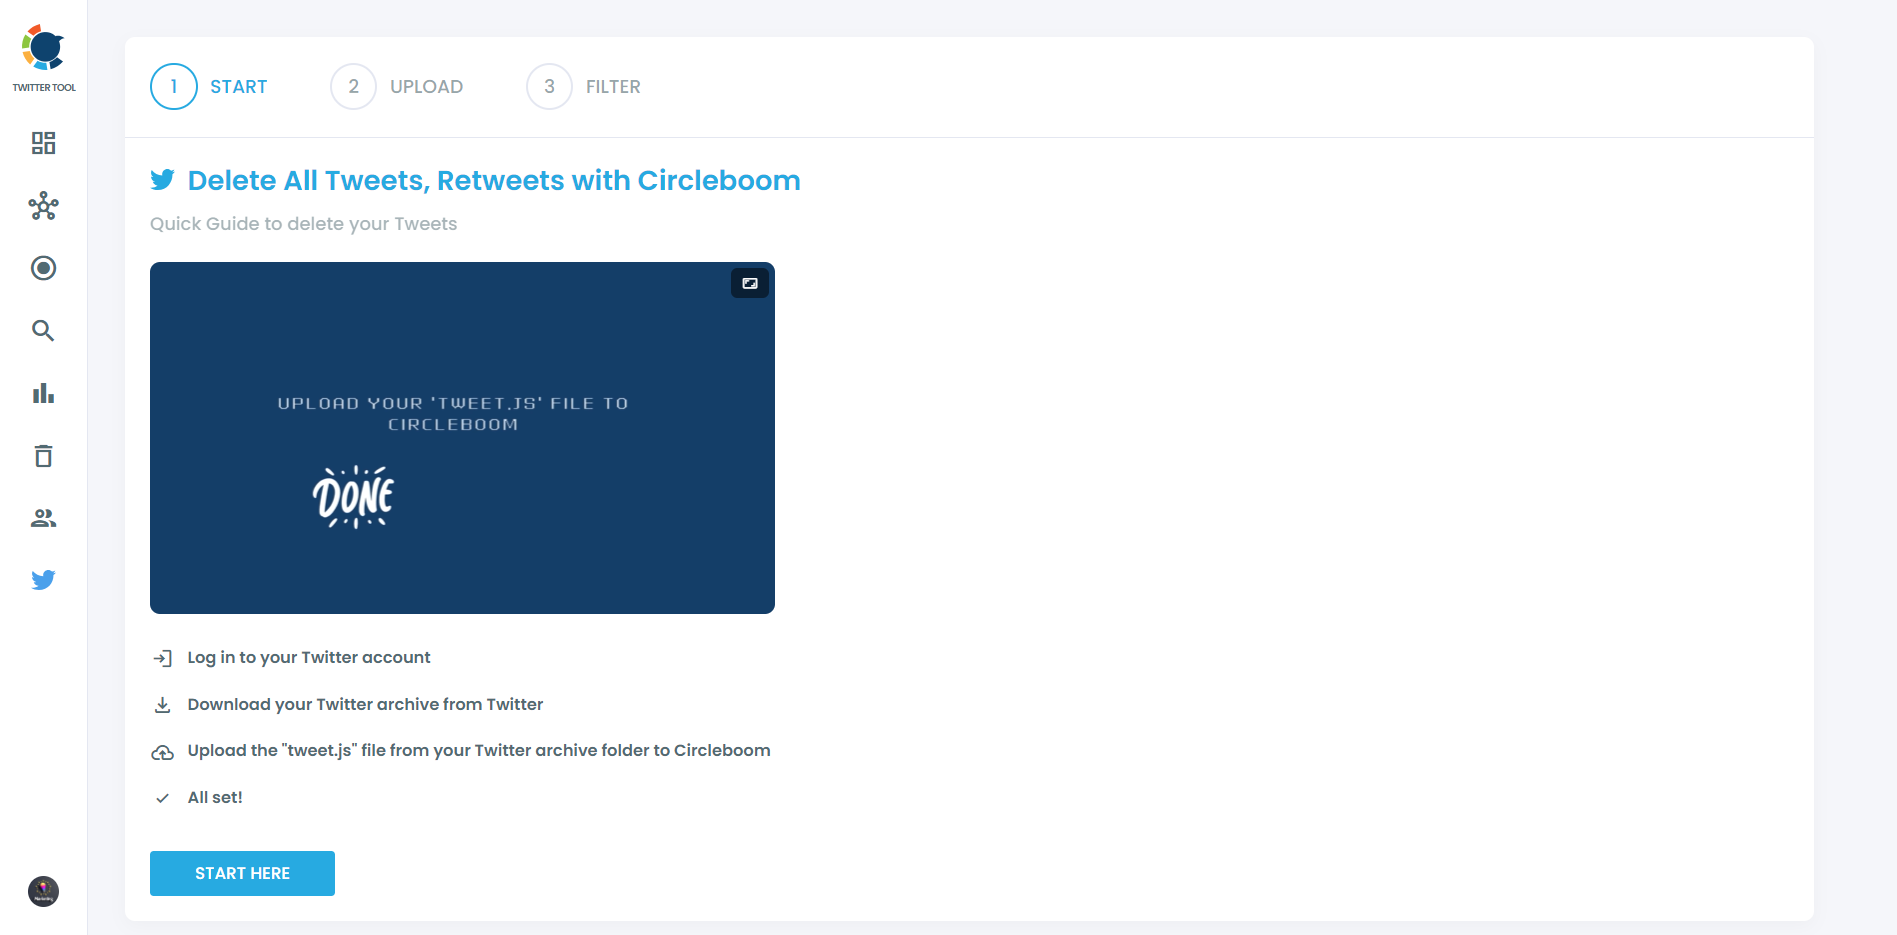 Download your Twitter archive and upload your tweet.js file.